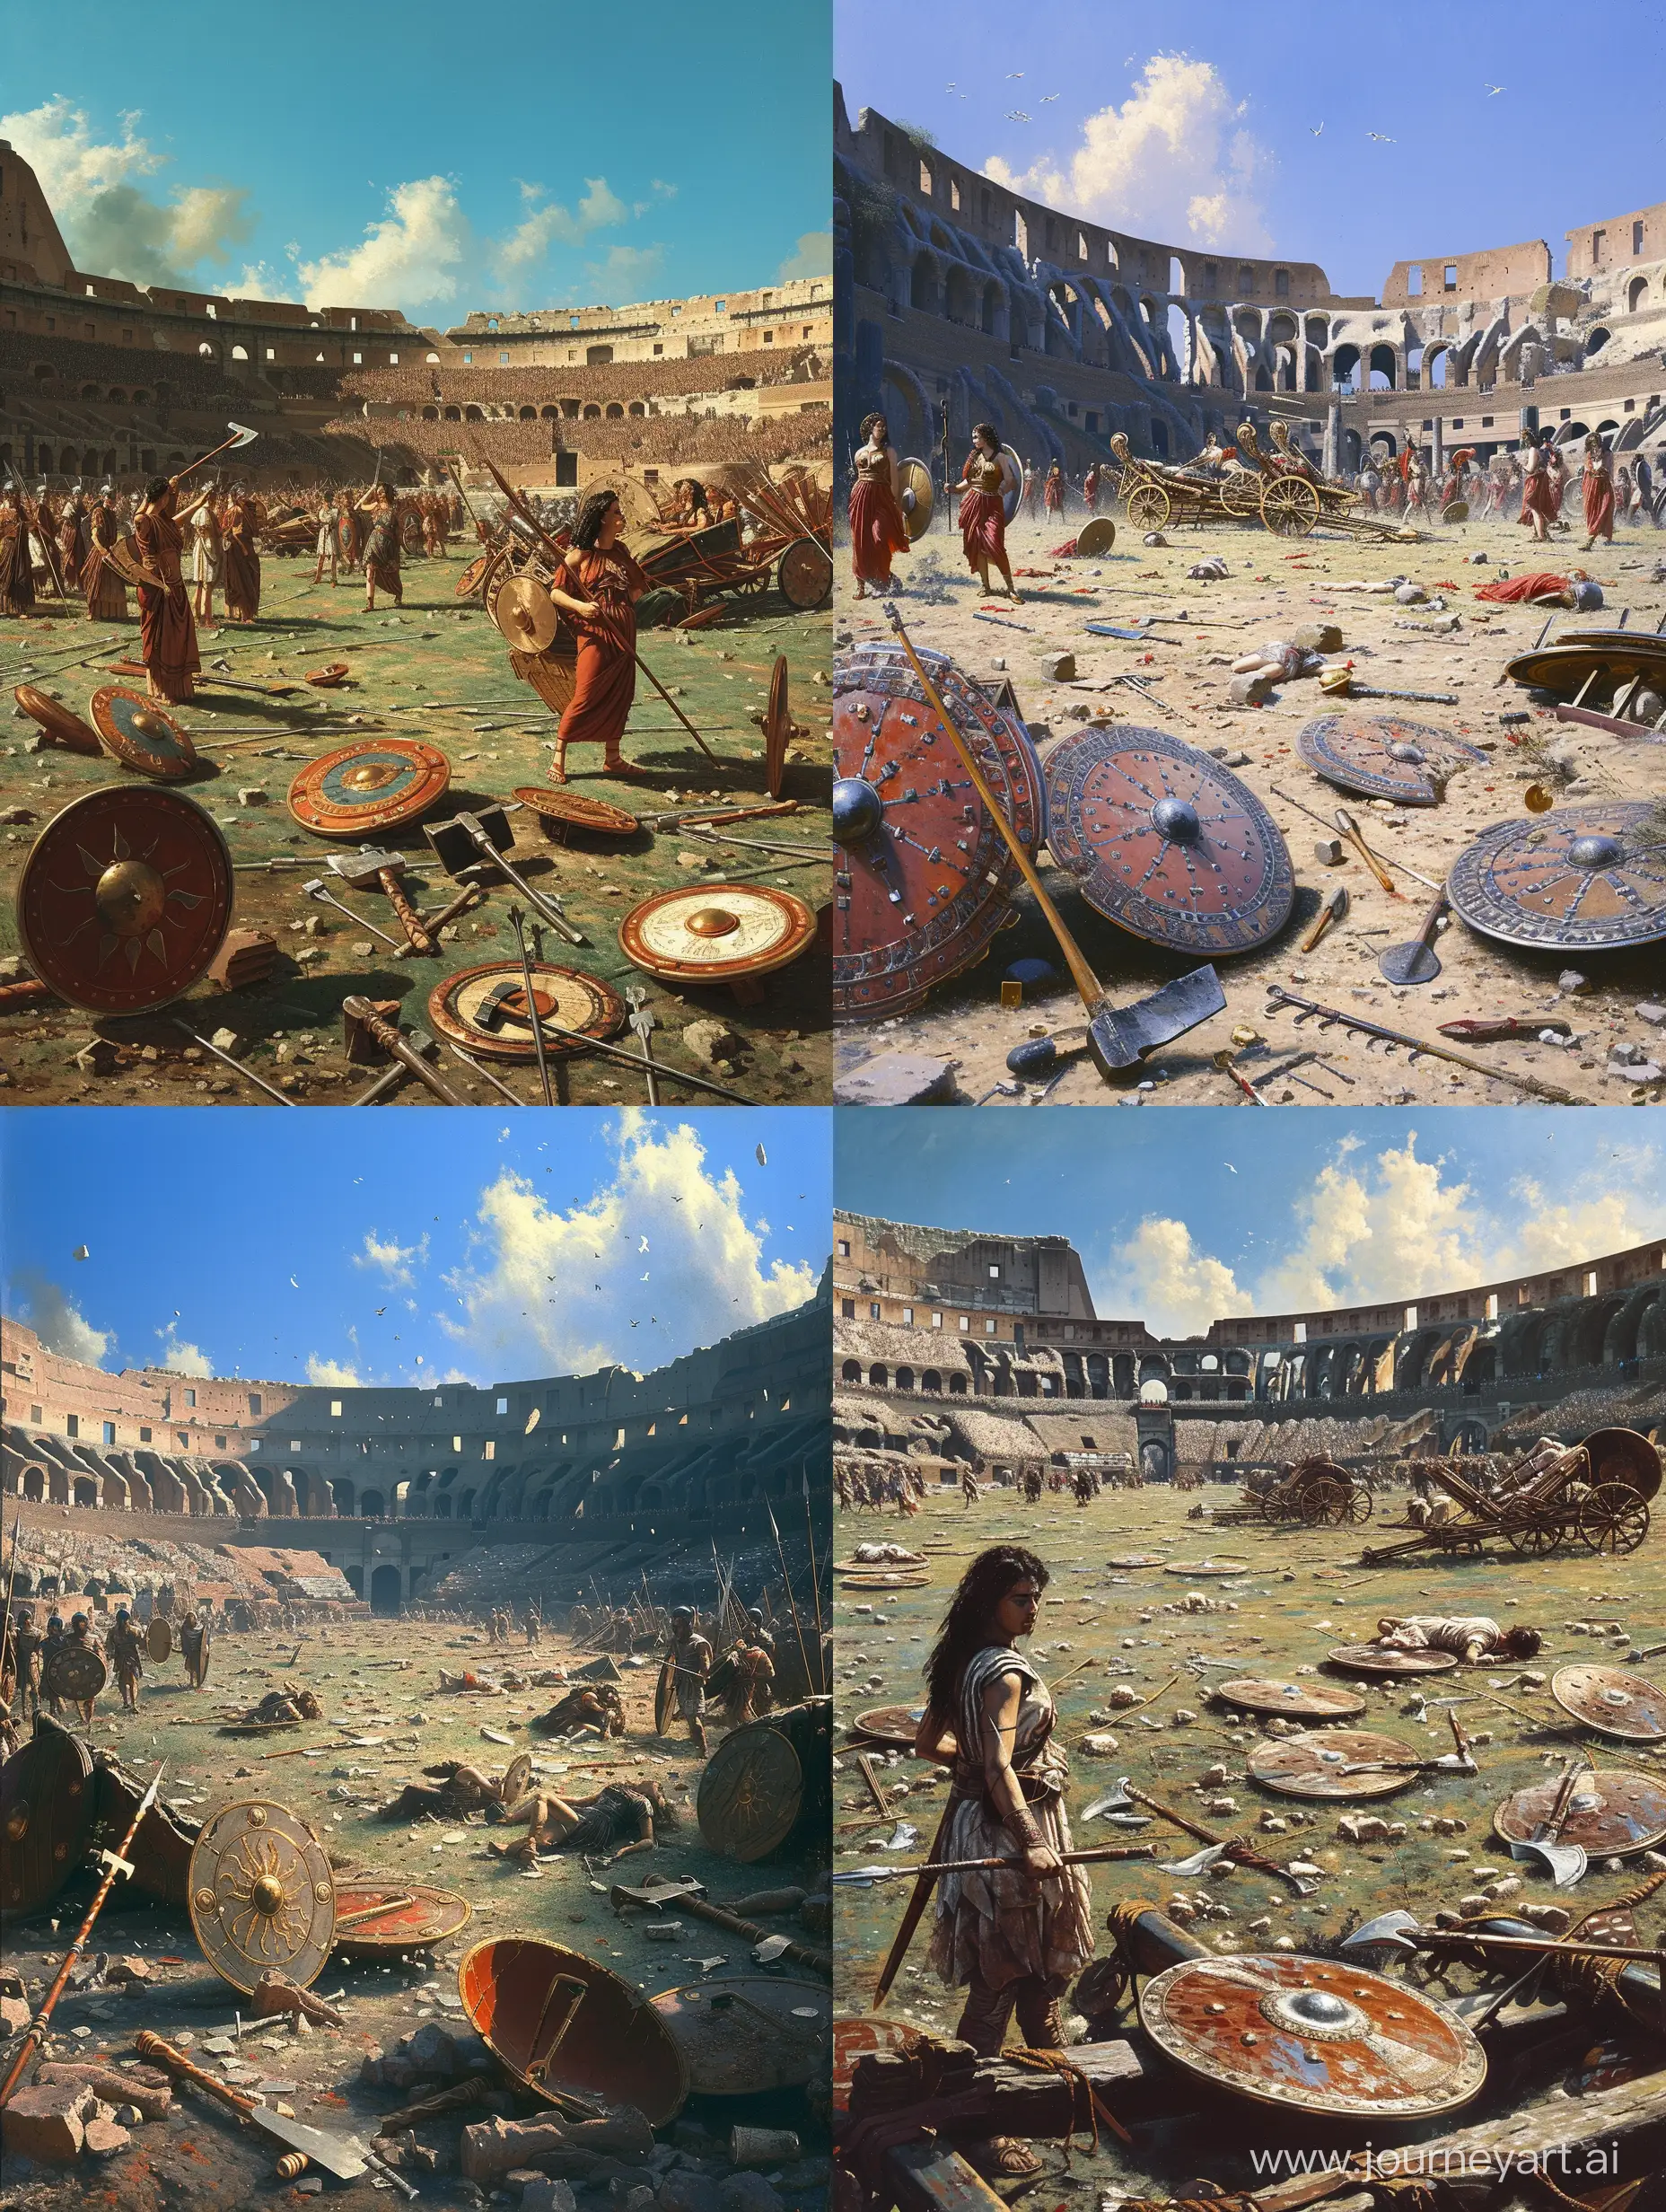 Female-Warriors-Battling-in-the-Colosseum-Amidst-Broken-Chariots-and-Scattered-Weapons